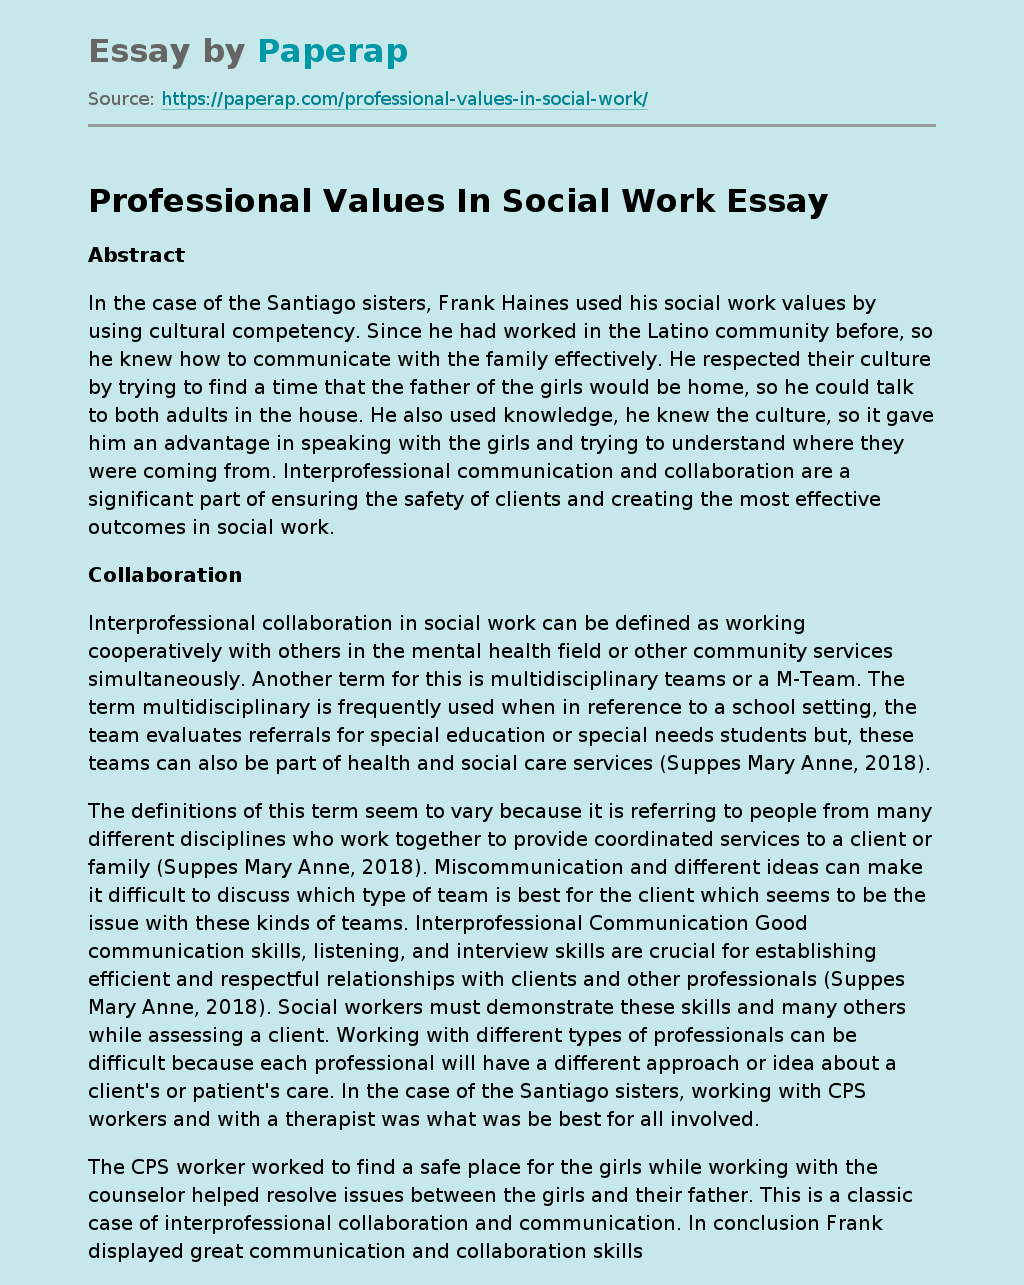 readiness for practice social work essay